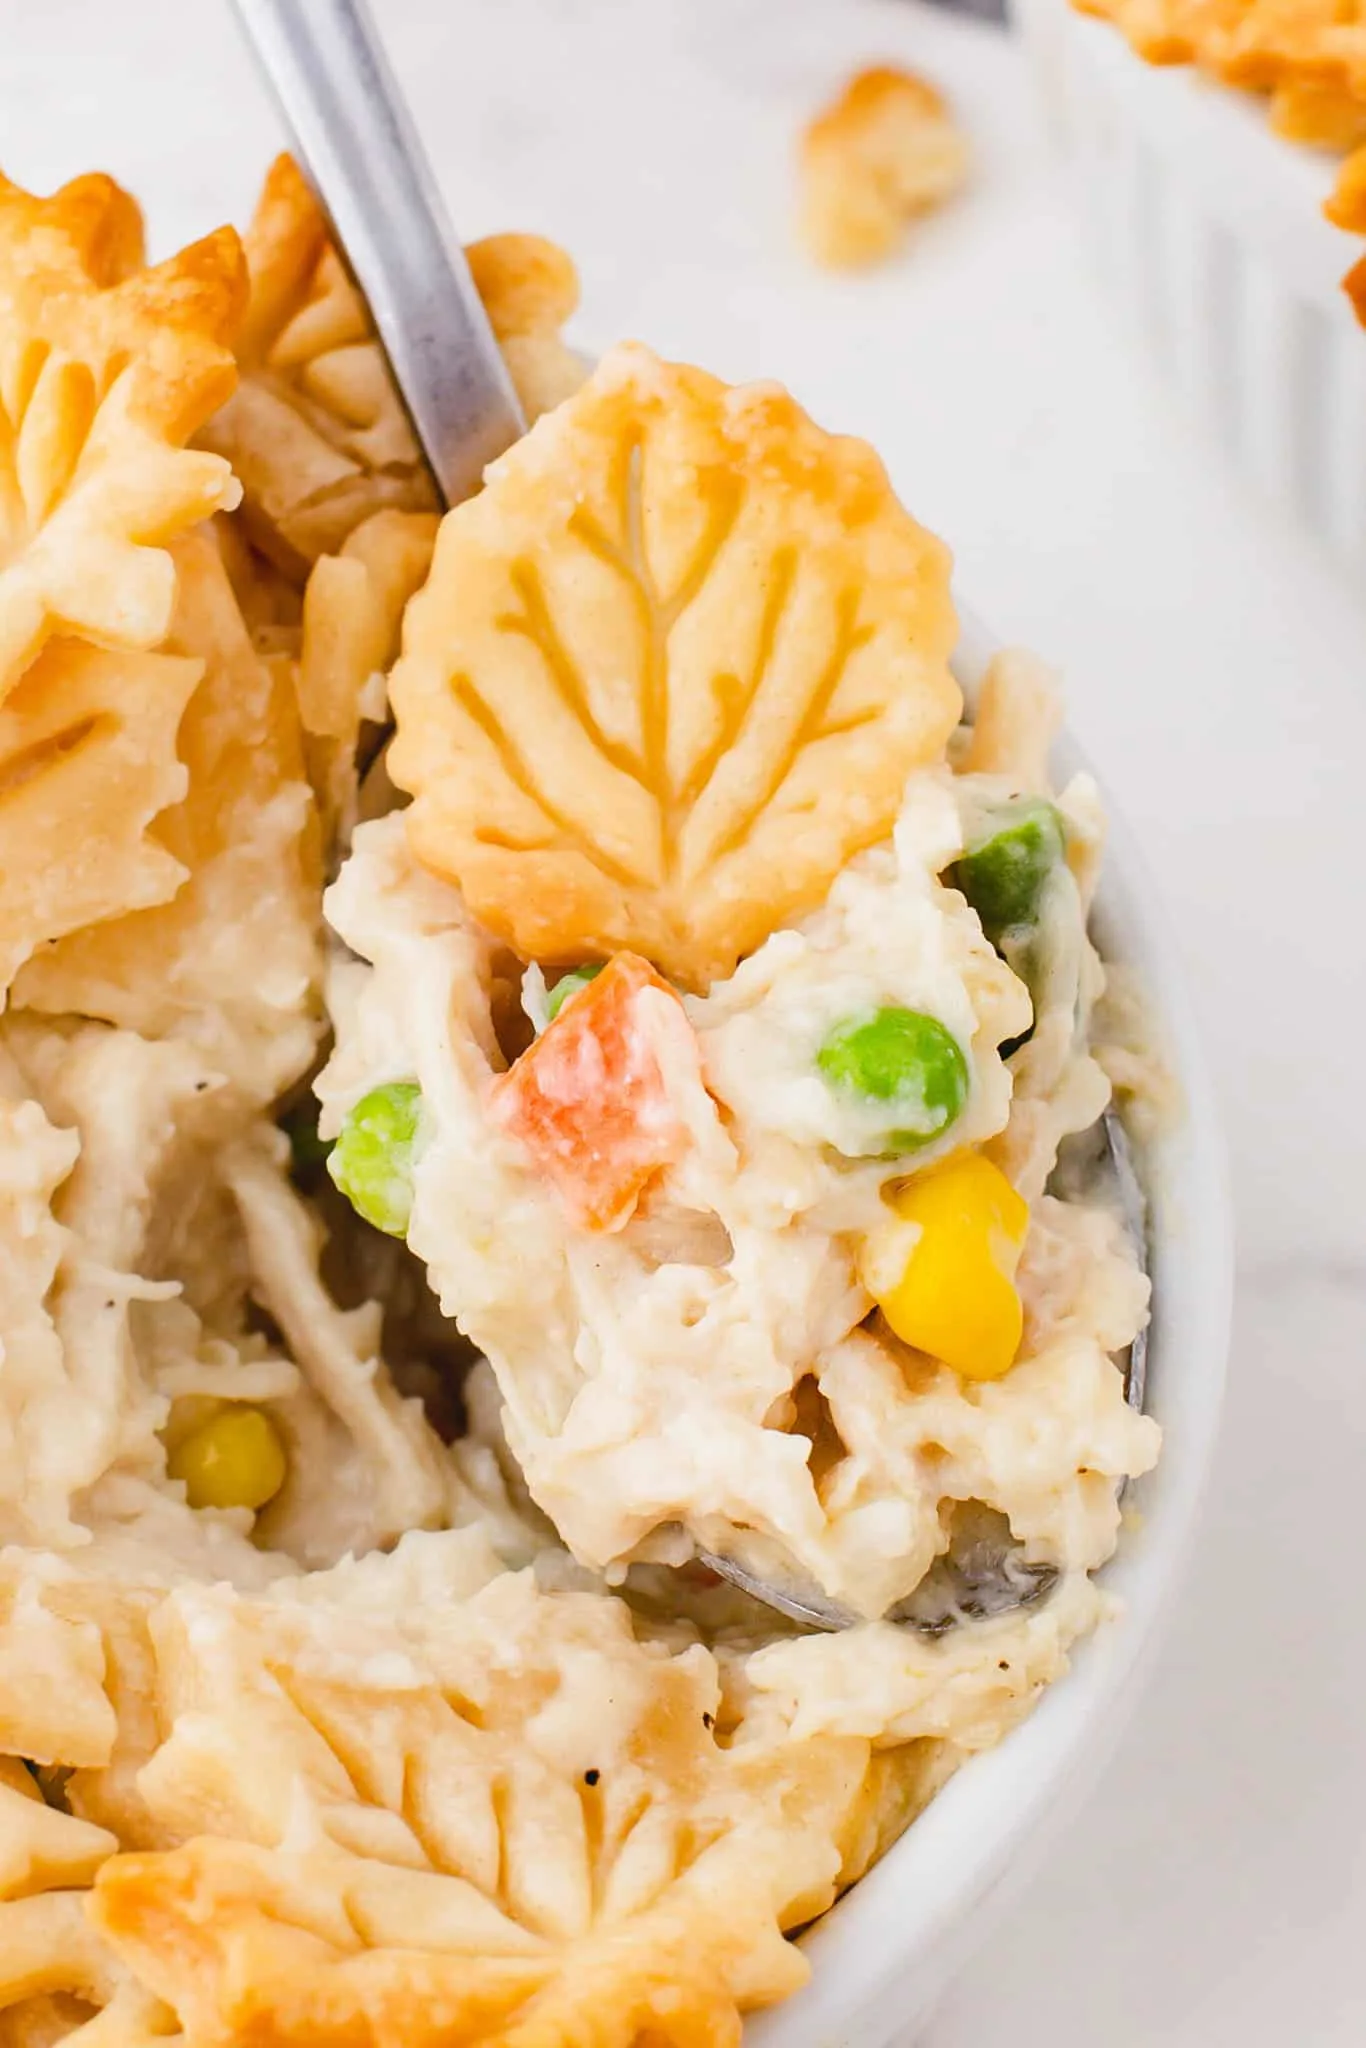 Easy Chicken Pot Pie is a hearty comfort food dish with a creamy chicken and vegetable filling topped with golden brown Pillsbury pie crust.